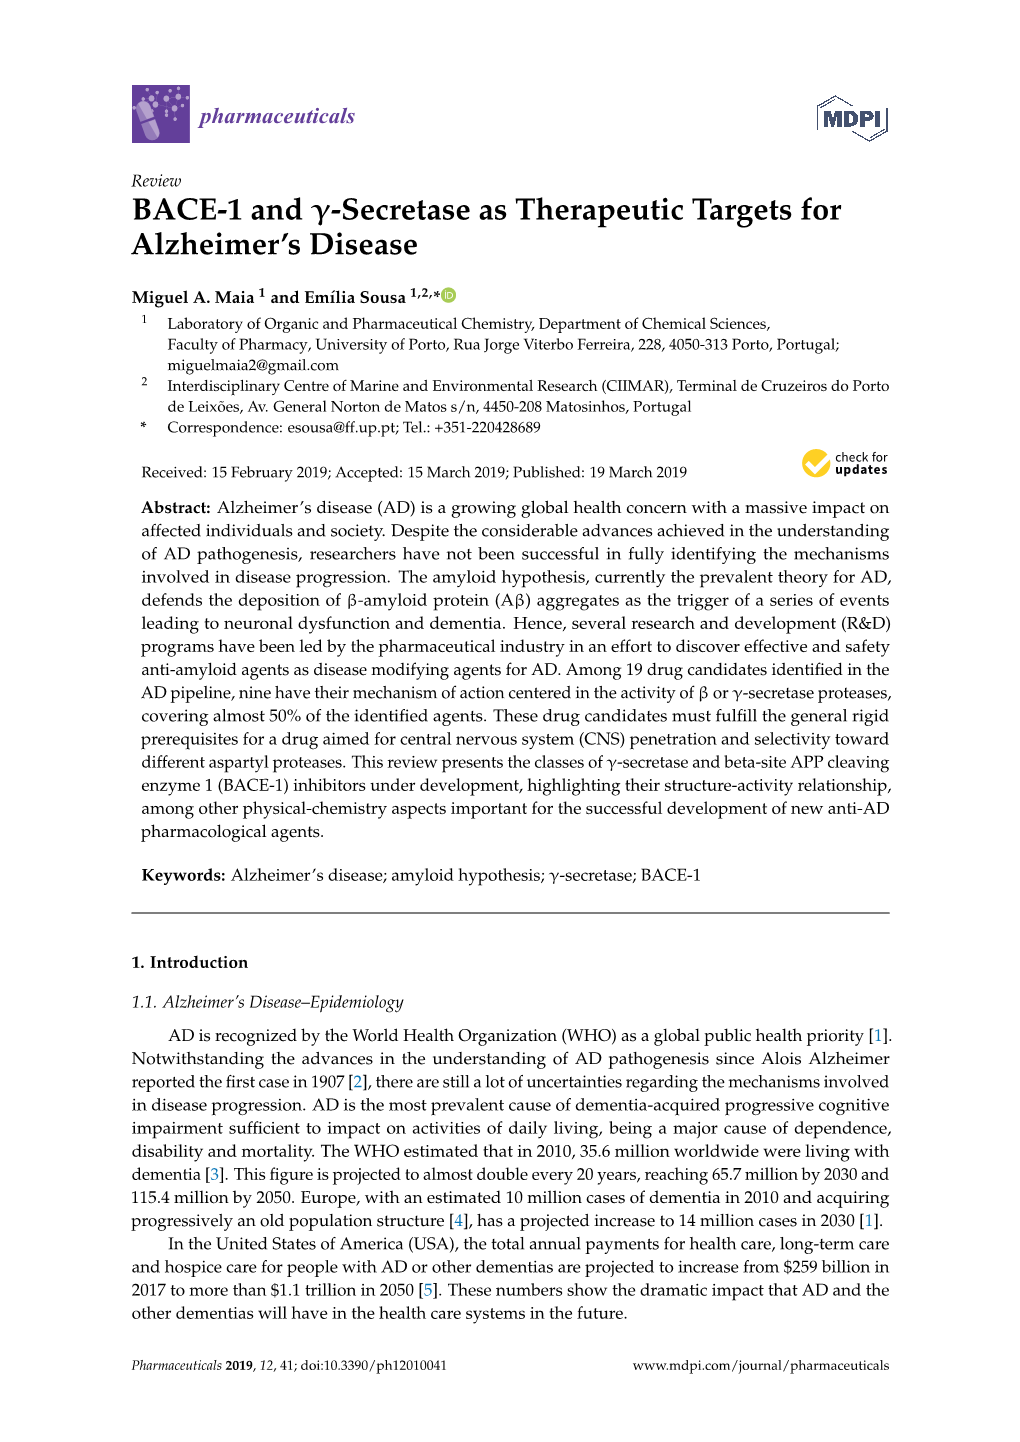 BACE-1 and -Secretase As Therapeutic Targets for Alzheimer's Disease